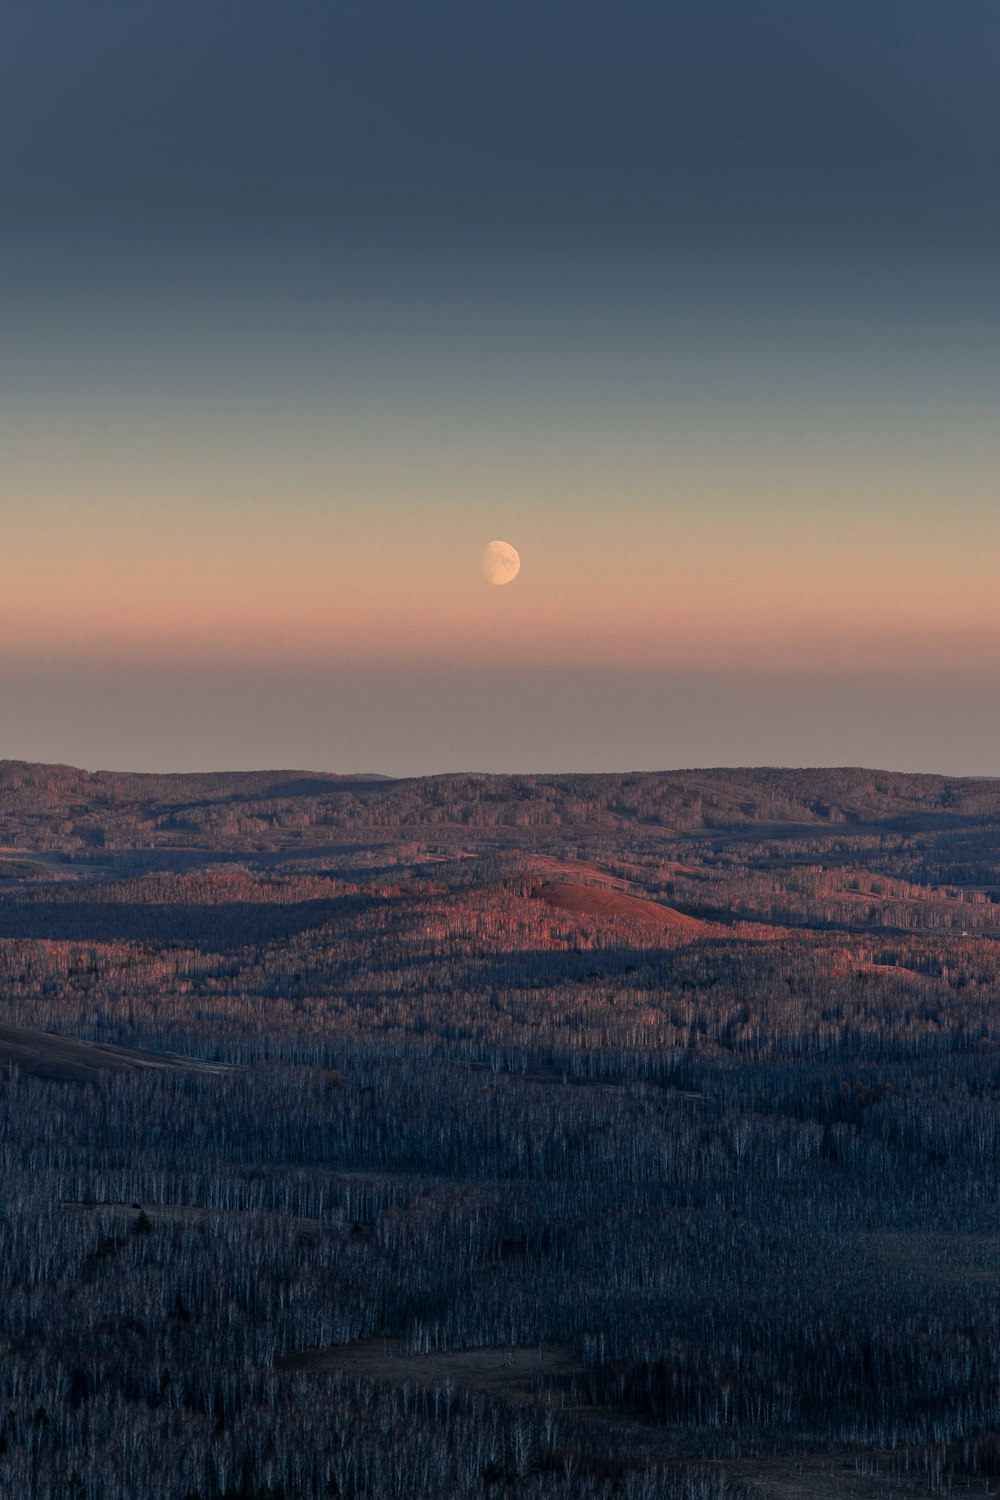 a full moon is seen in the distance over a landscape